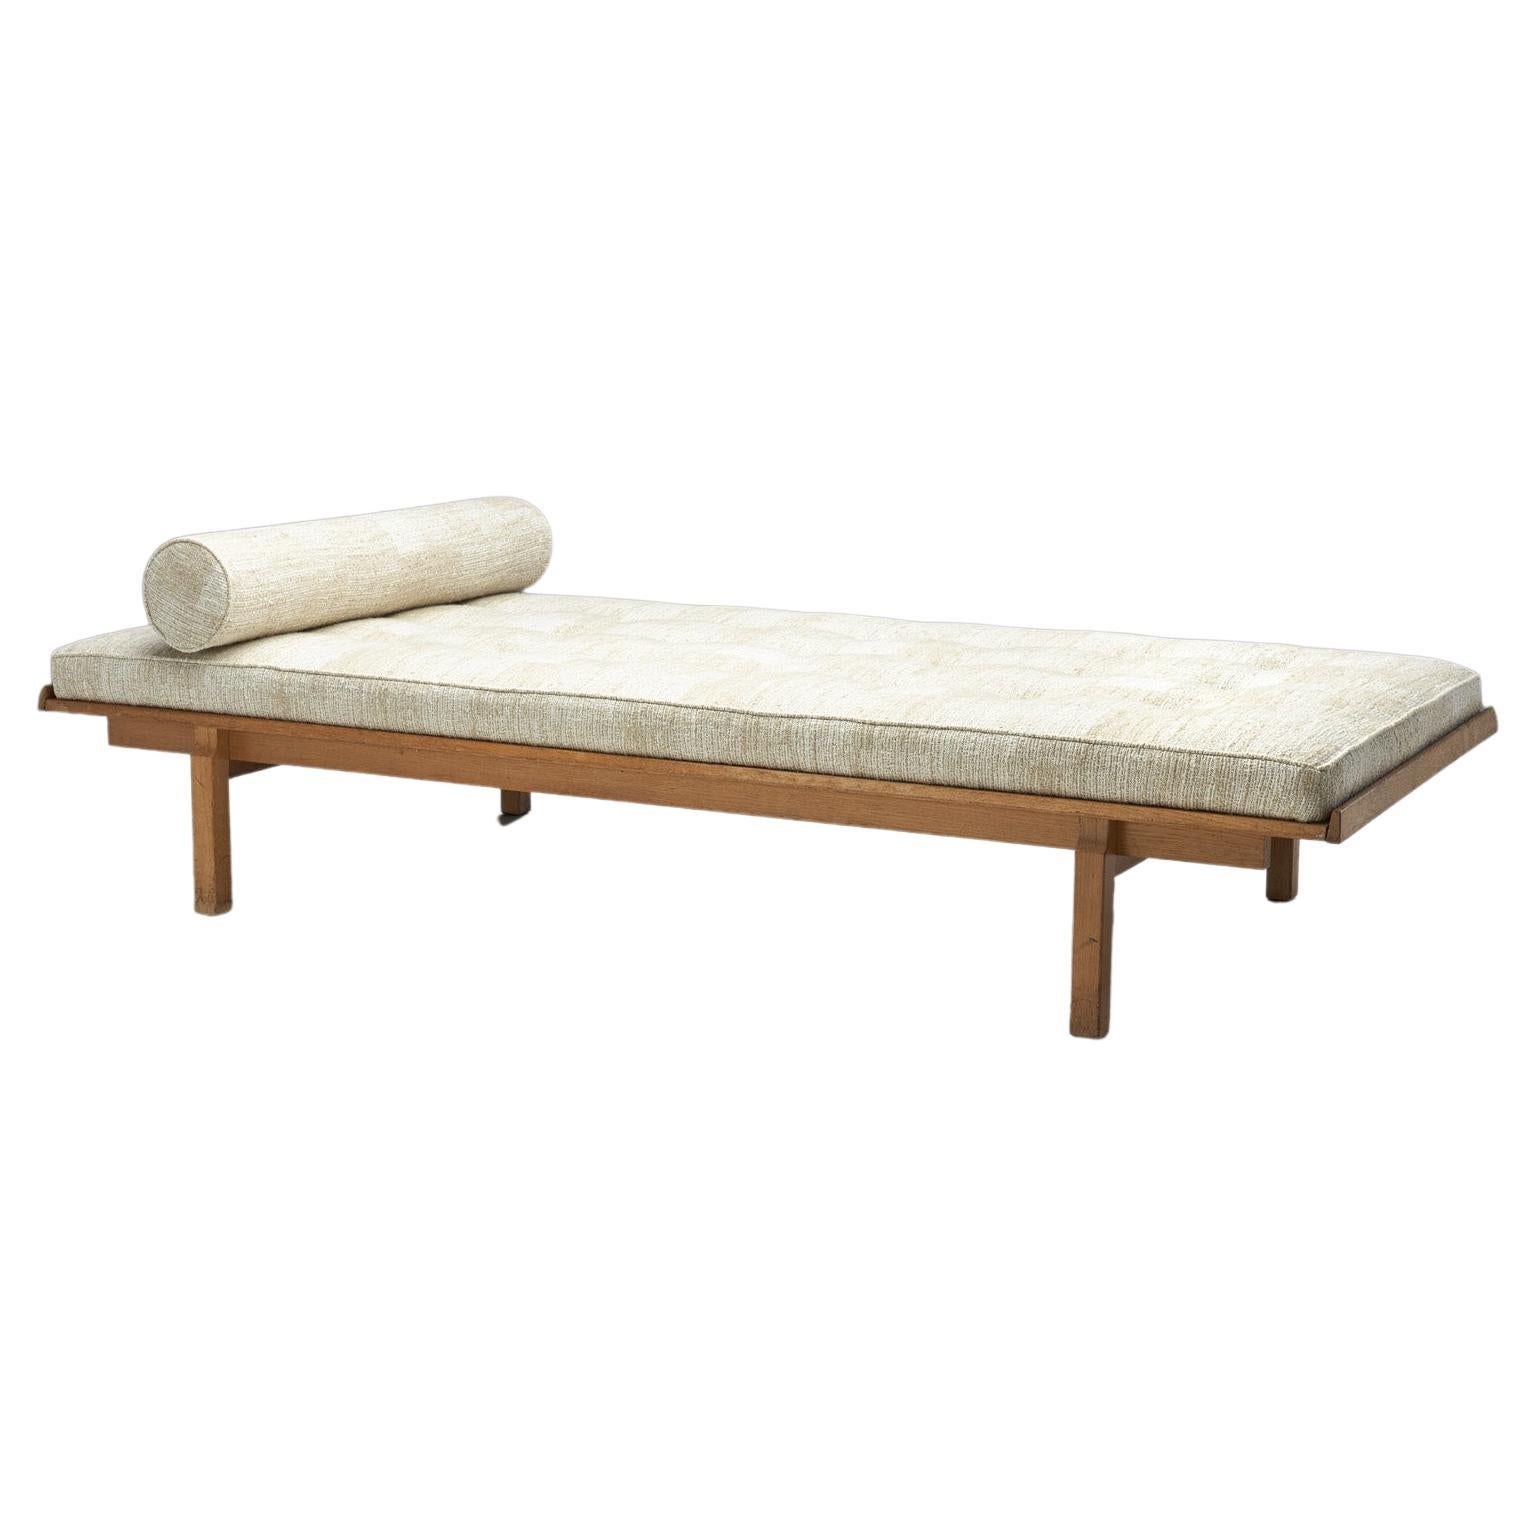 Danish Oak Daybed with Upholstered Mattress and Pillow, Denmark, ca 1950s For Sale